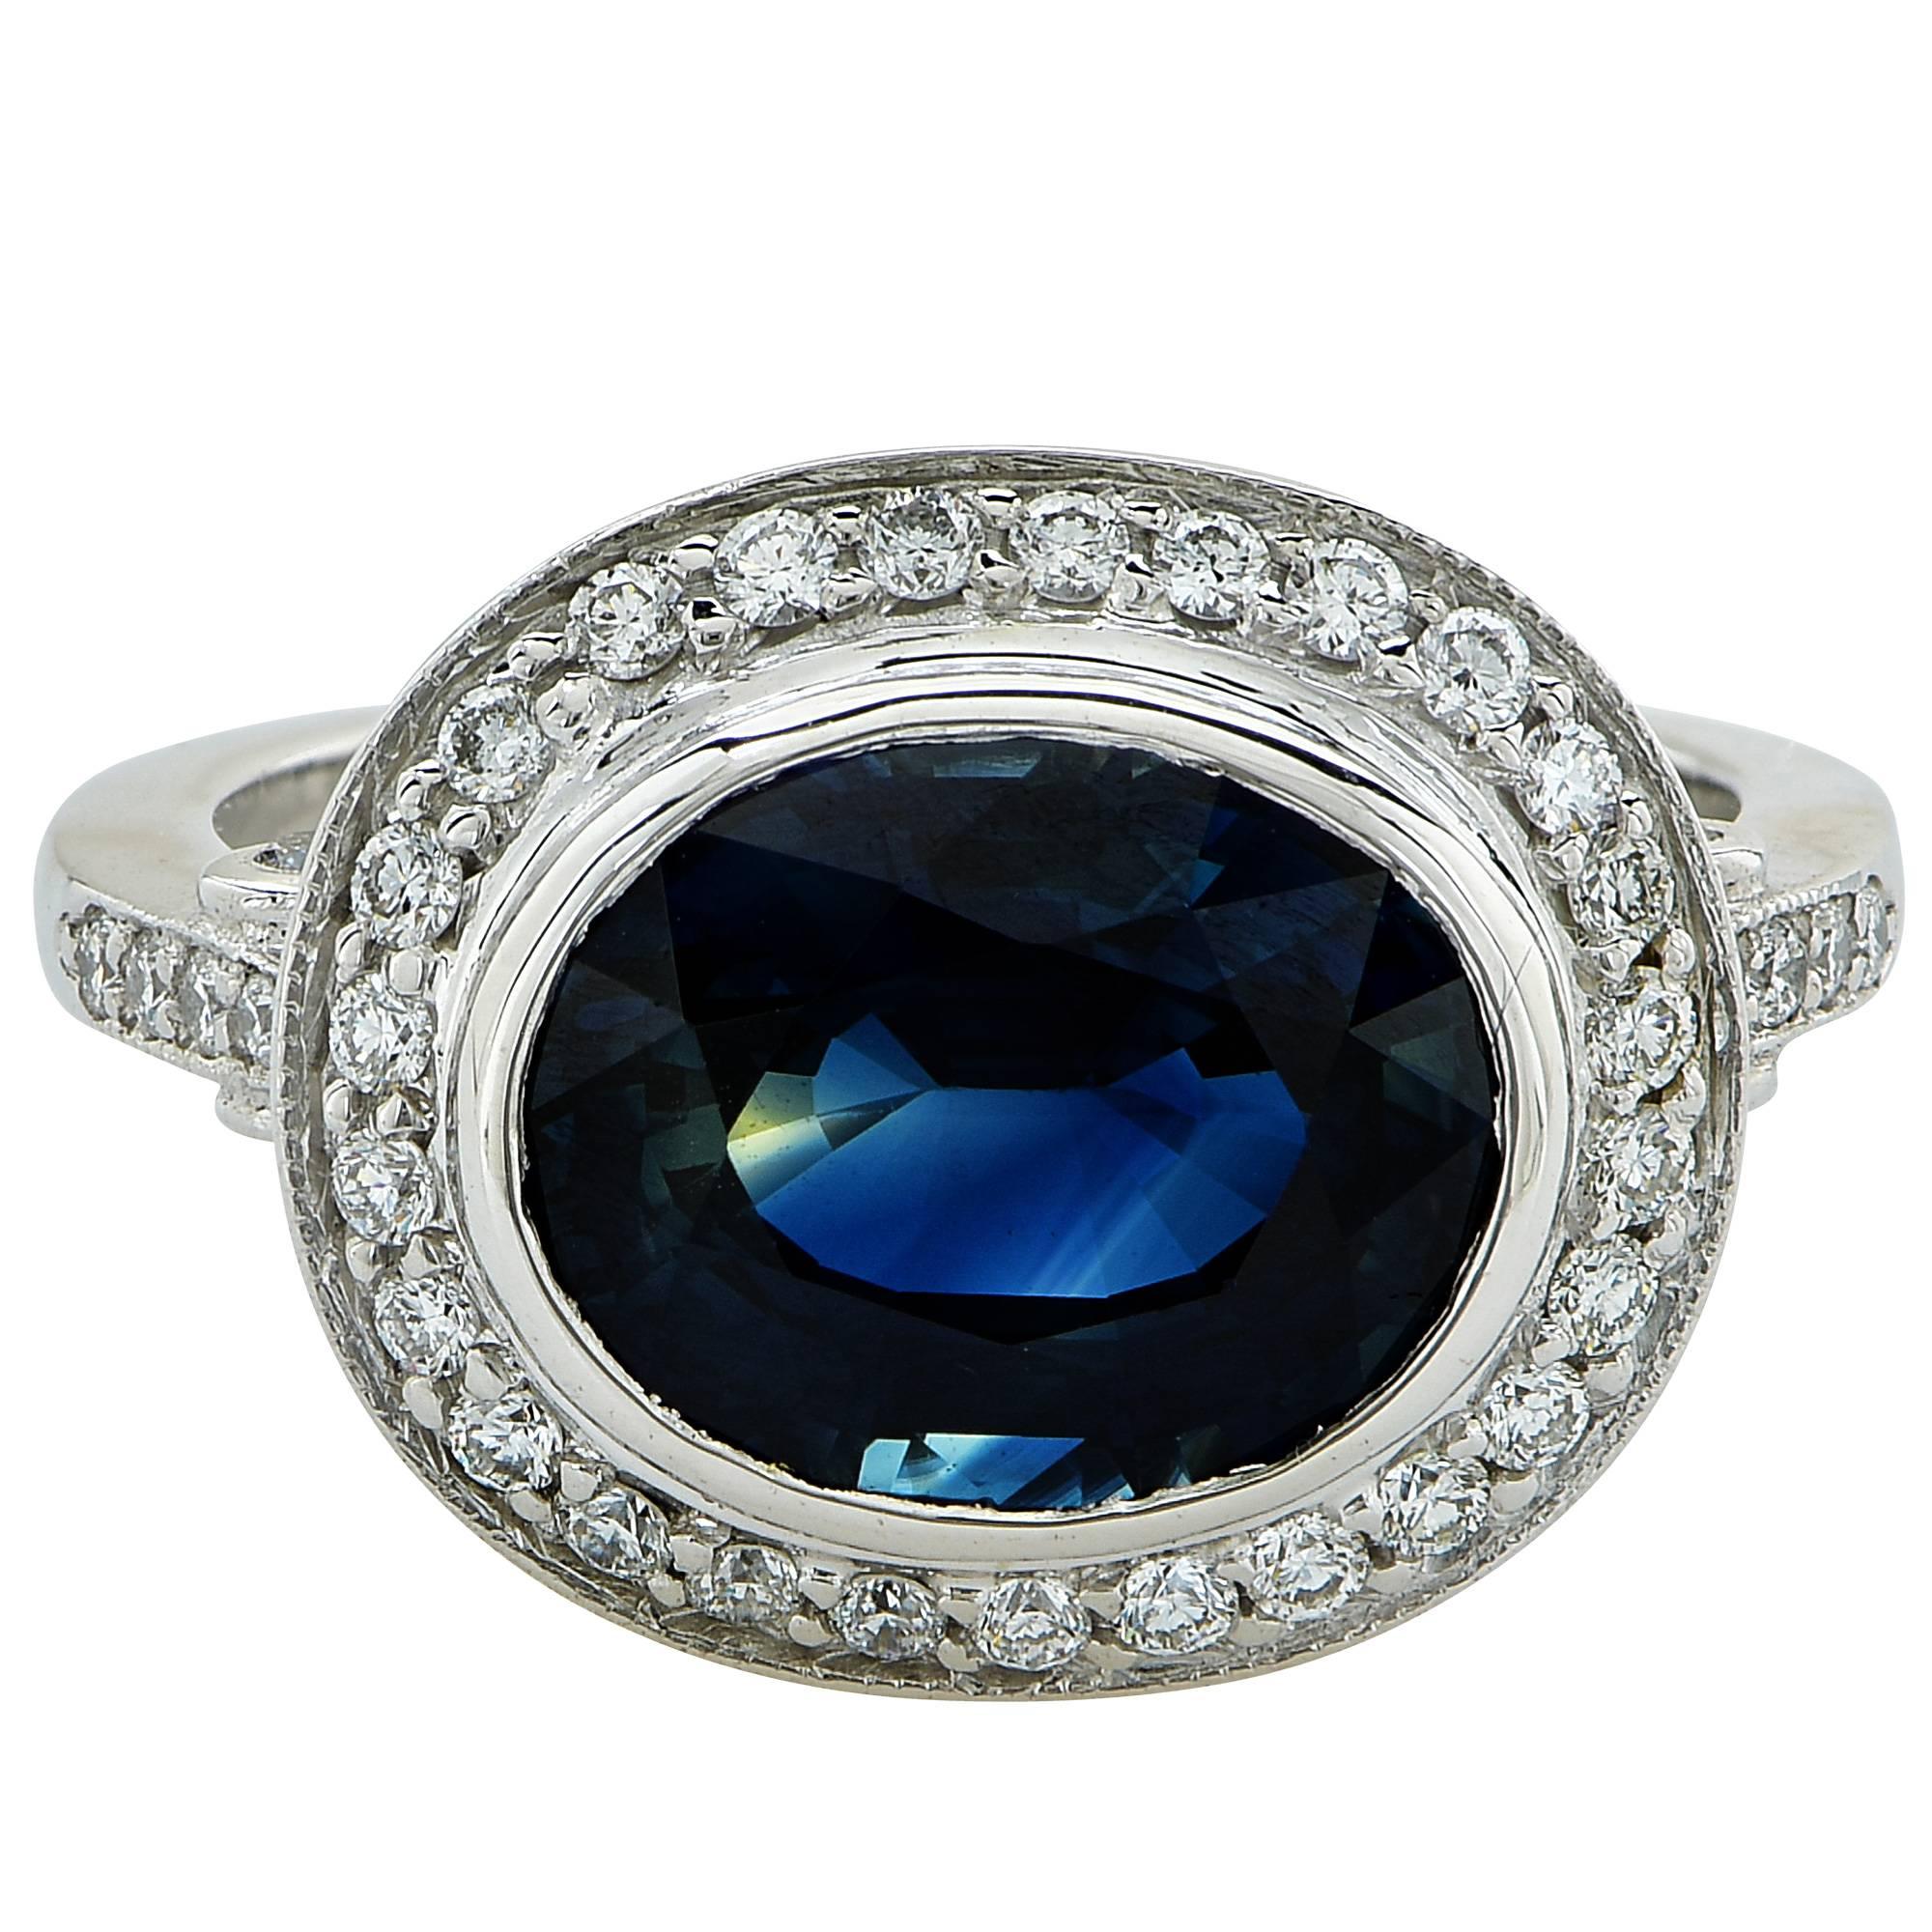 Platinum custom-made ring featuring a 4.31ct oval cut blue sapphire accented by approximately .50cts of round brilliant cut diamonds, G color, VS clarity.

Ring size: 6 (can be sized up or down free of charge)
Metal weight: 7.79 grams

This